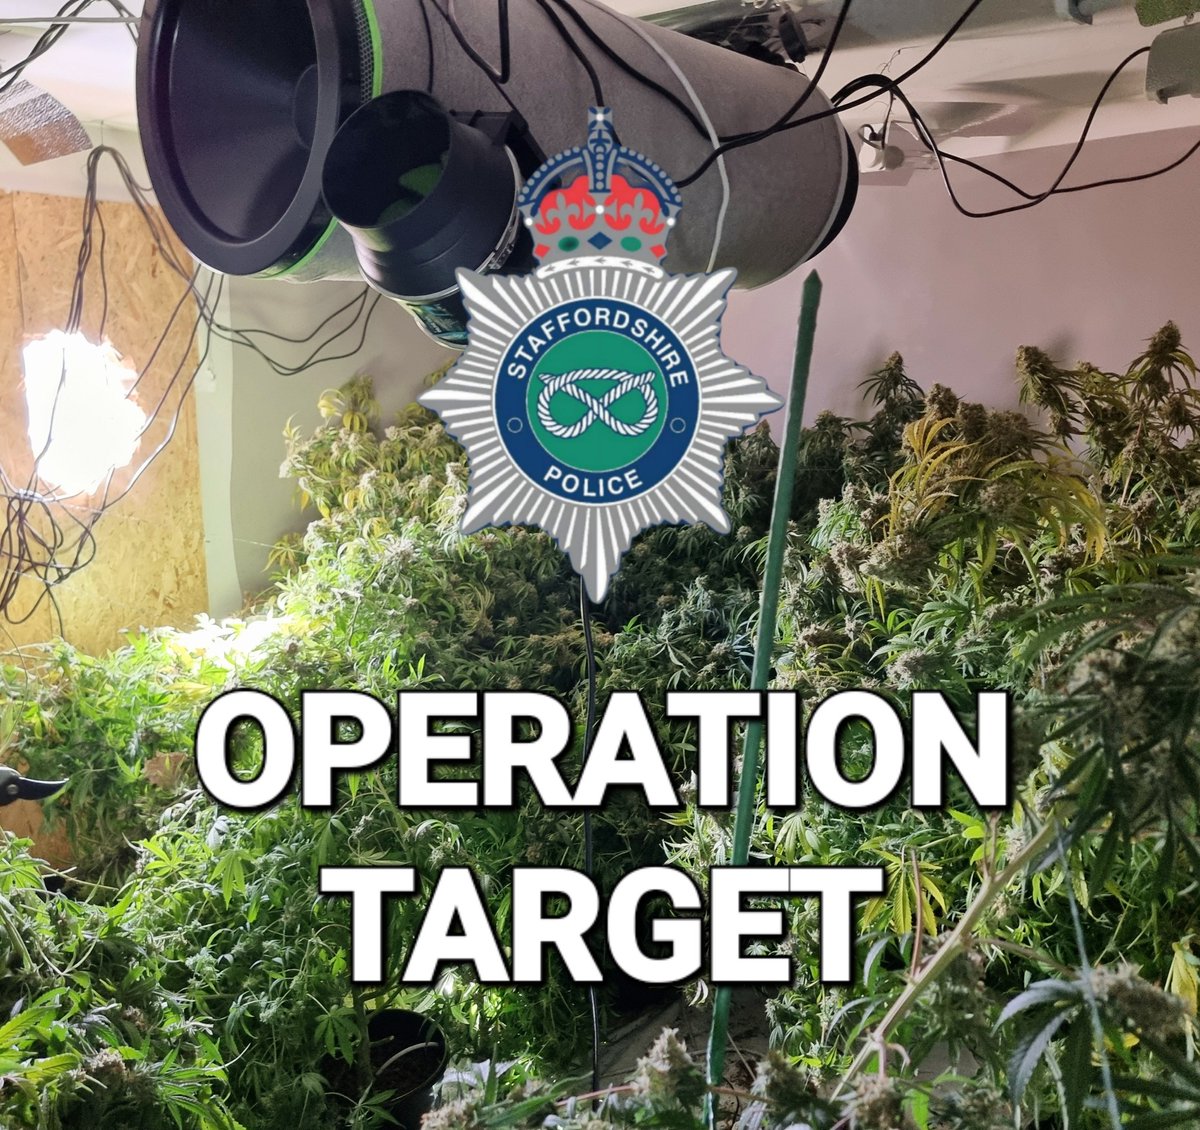 GROW; This morning, officers discover a large cannabis grow at a property in Cannock. Entry was gained and the grow was dismantled, evidence seized and enquiries are now underway to identify those involved. 👮‍♂️👃 #CannabisGrow #OpTarget #Cannock #Police